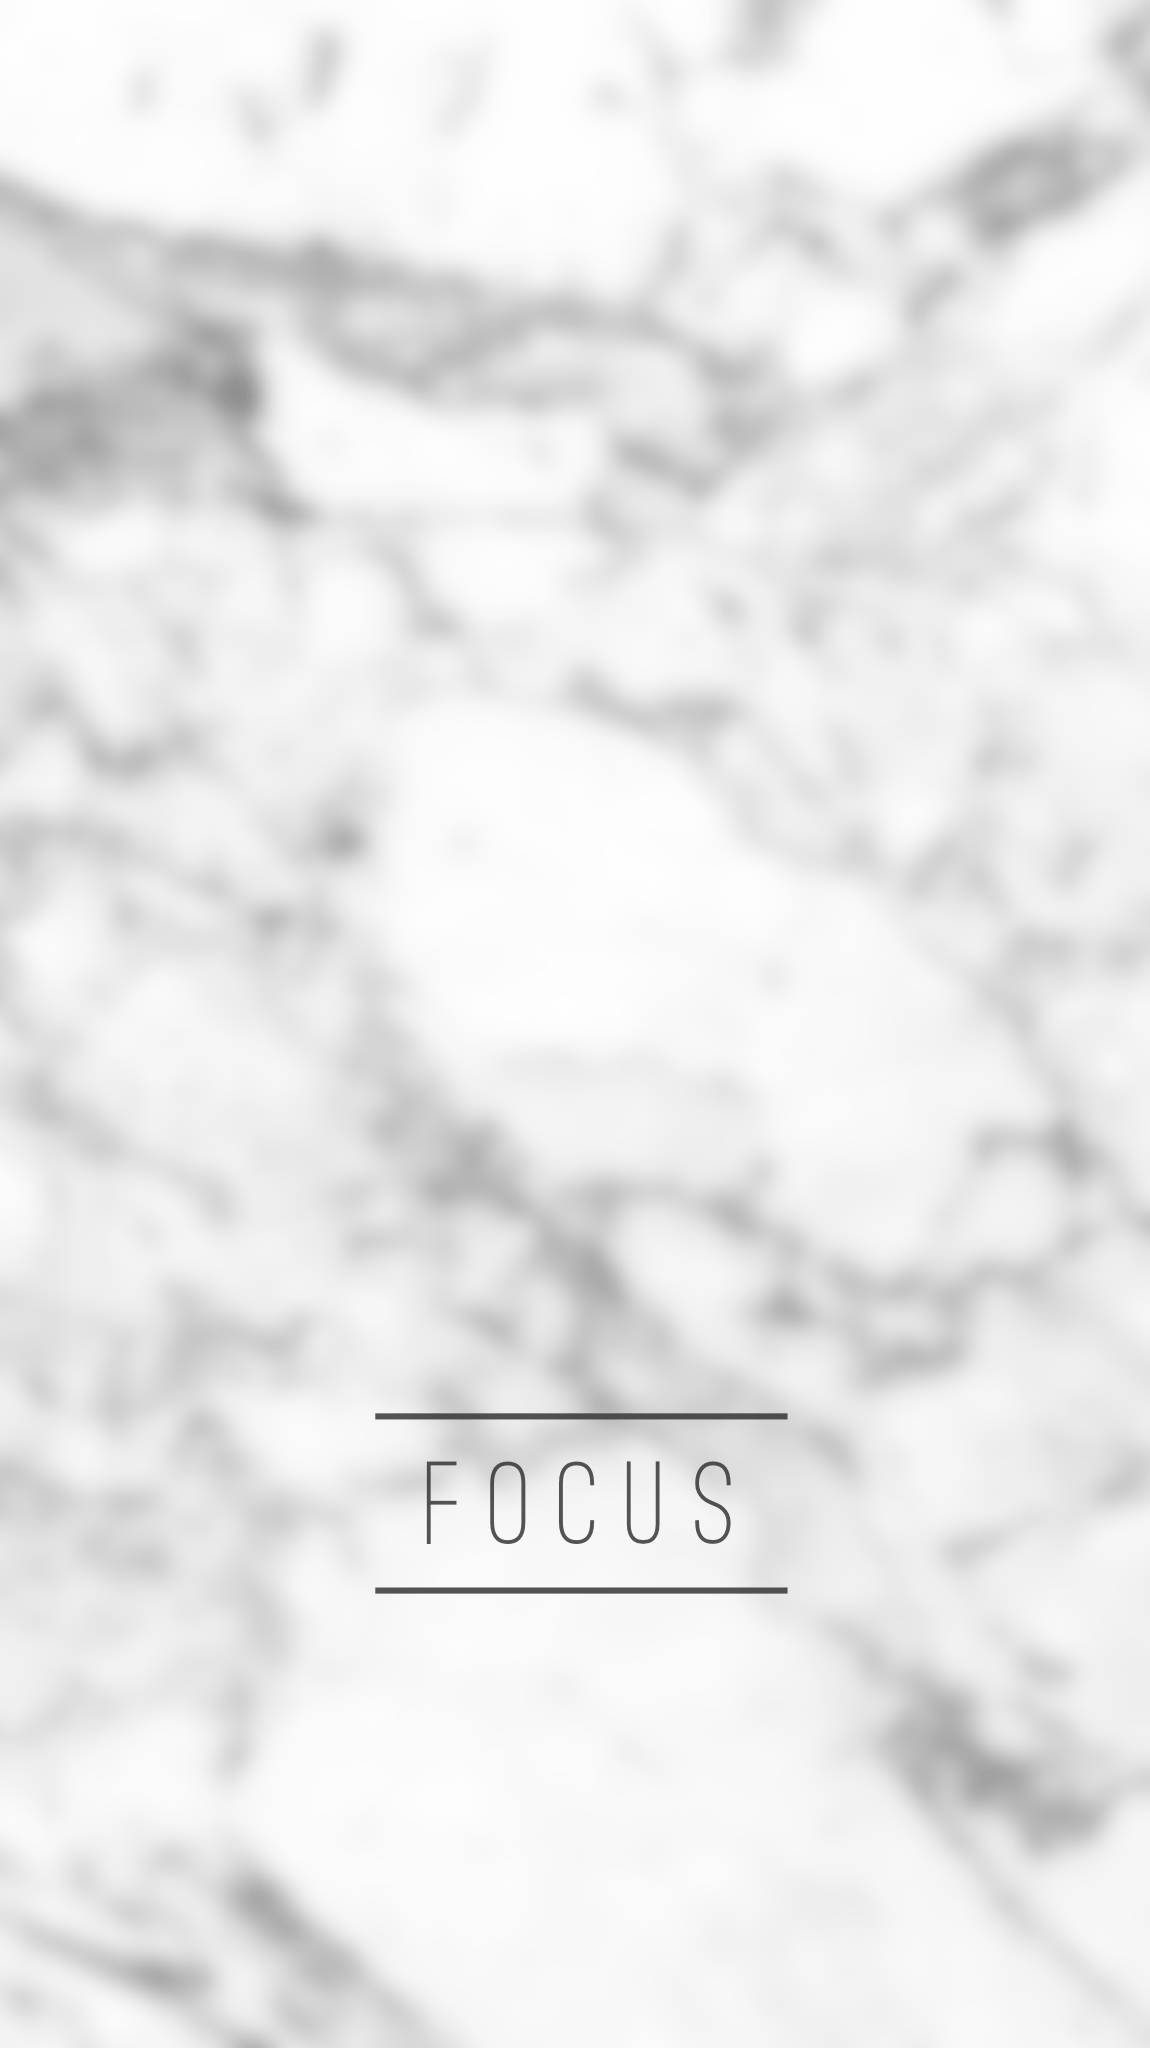 Focus Wallpaper to Match Any Home's Decor | Society6